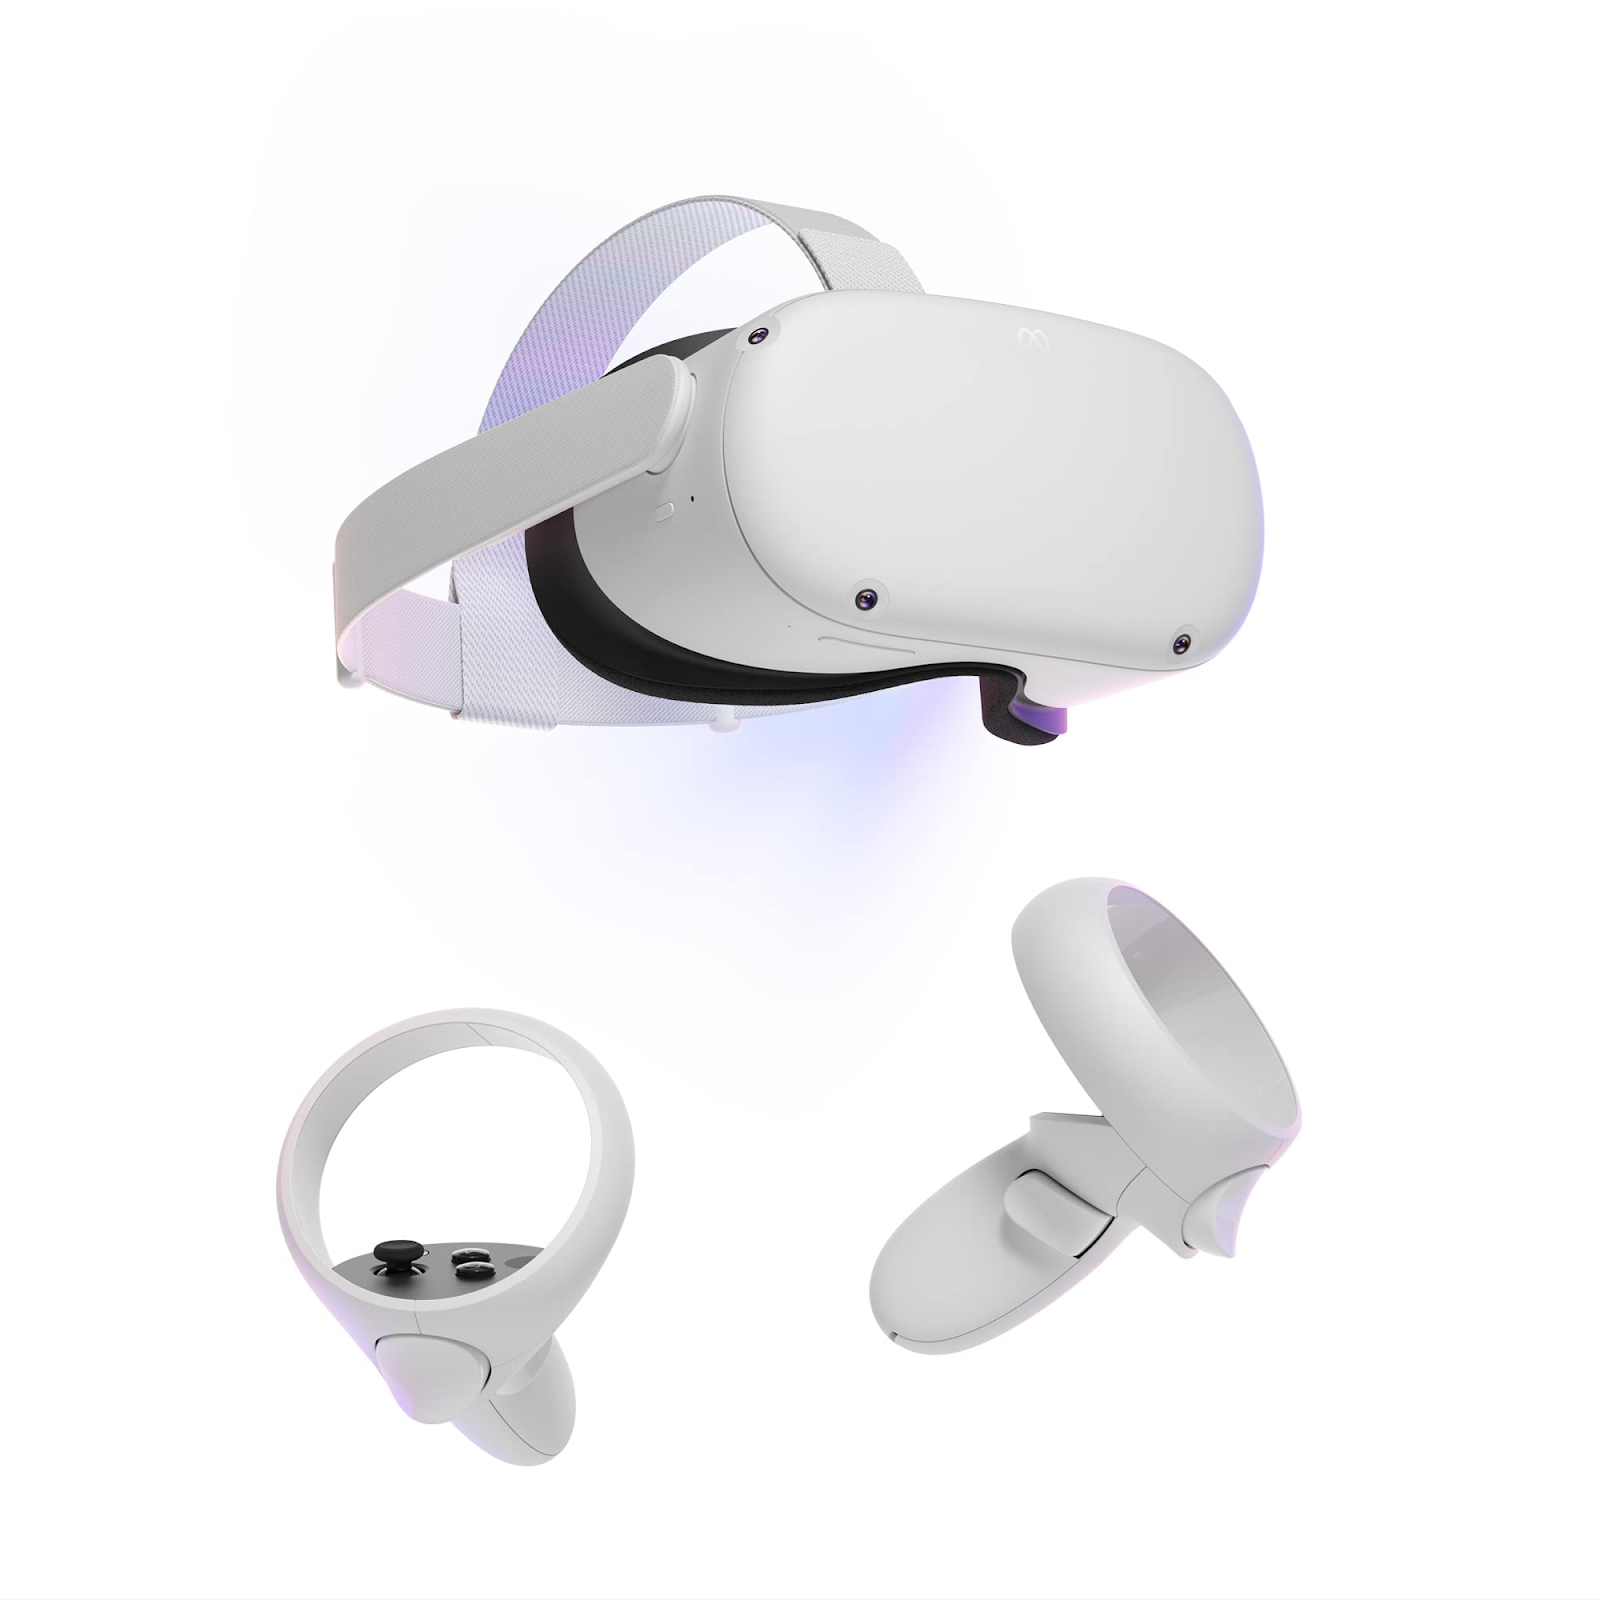 White Oculus headset and two hand controllers floating in the air.